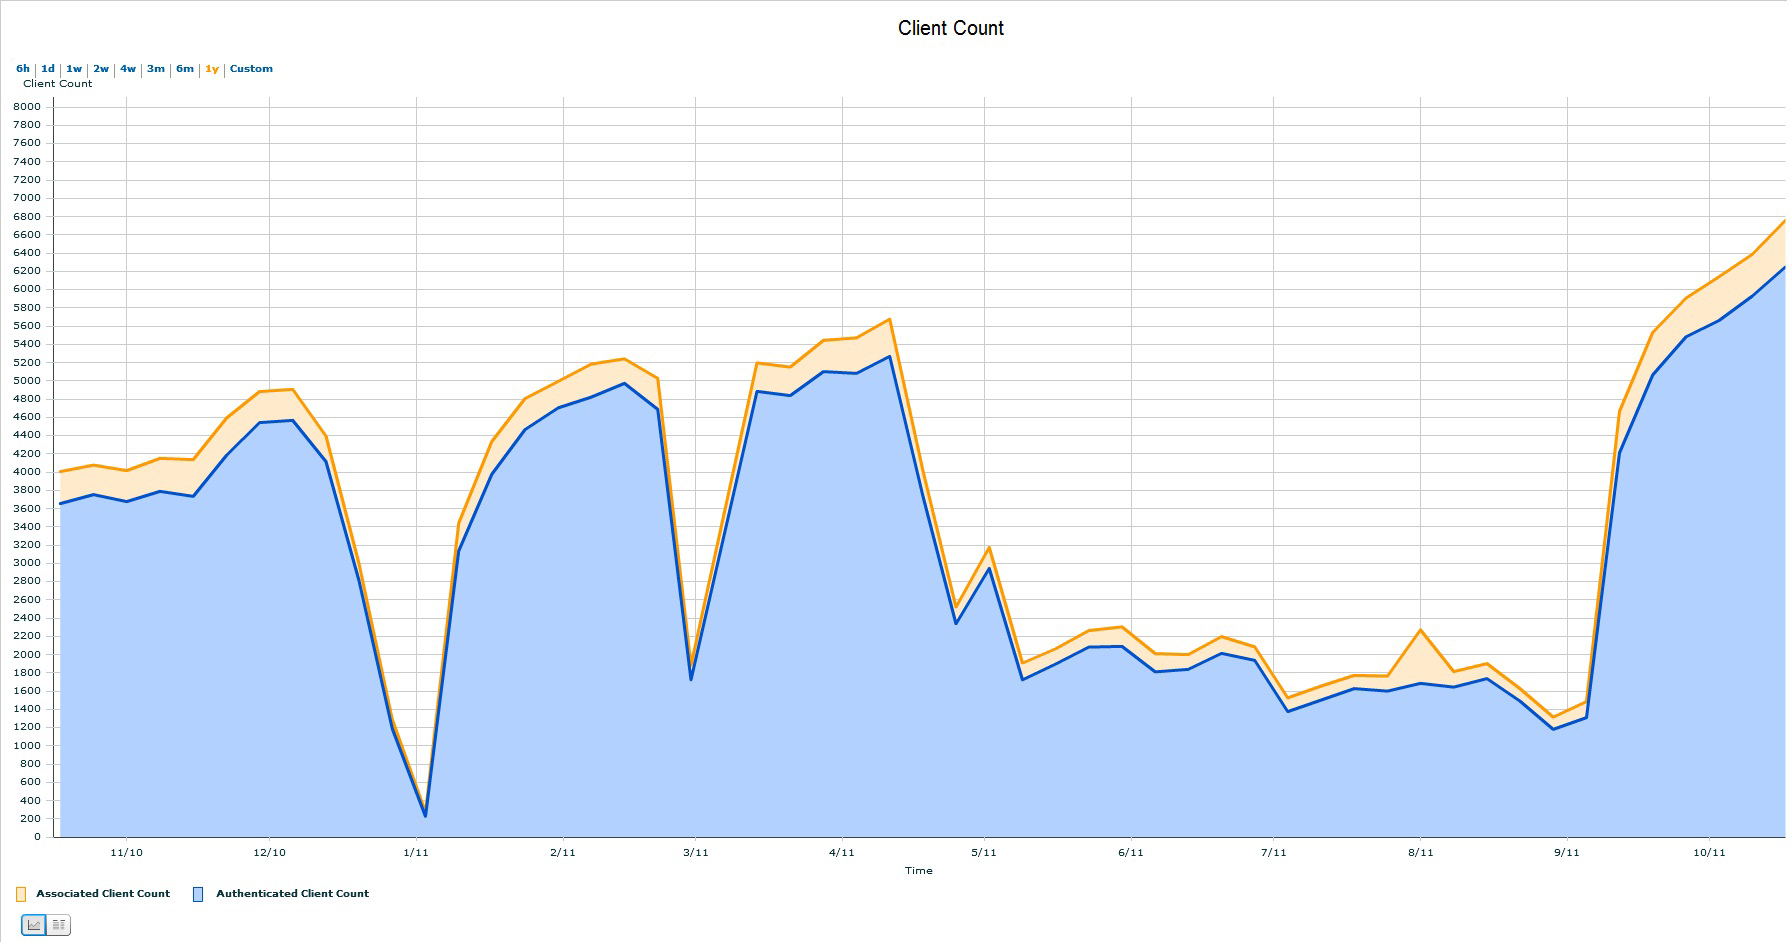 Simultaneous clients during October 2010 and November 2011.